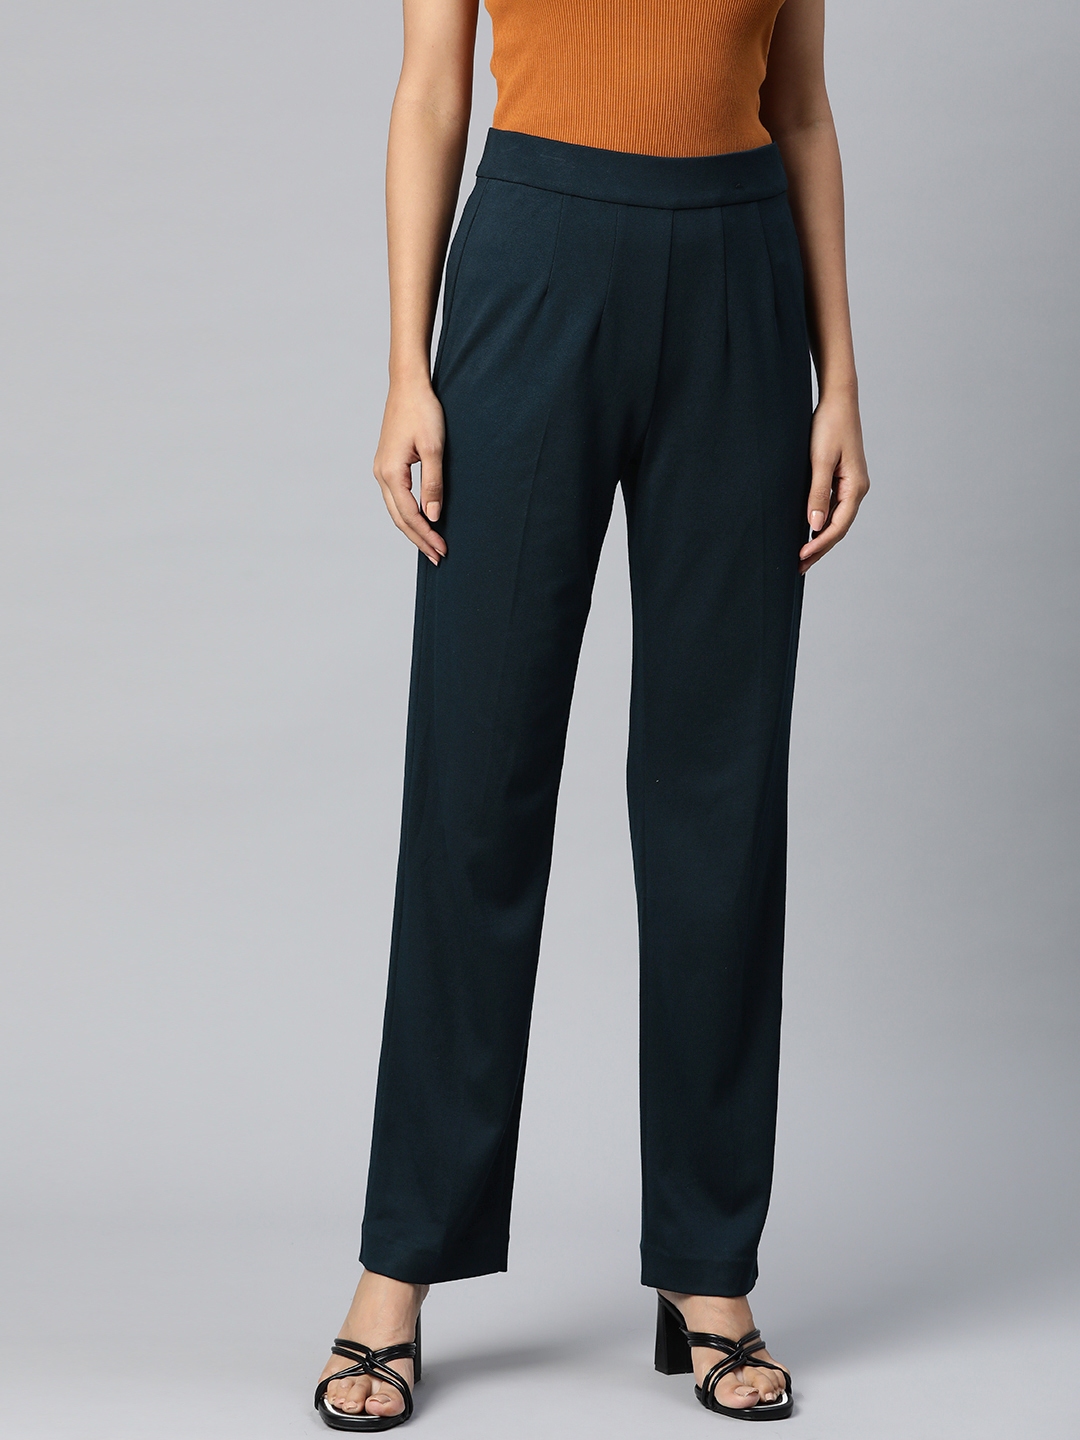 Buy Marks & Spencer Women Navy Blue Straight Fit Pleated Trousers ...